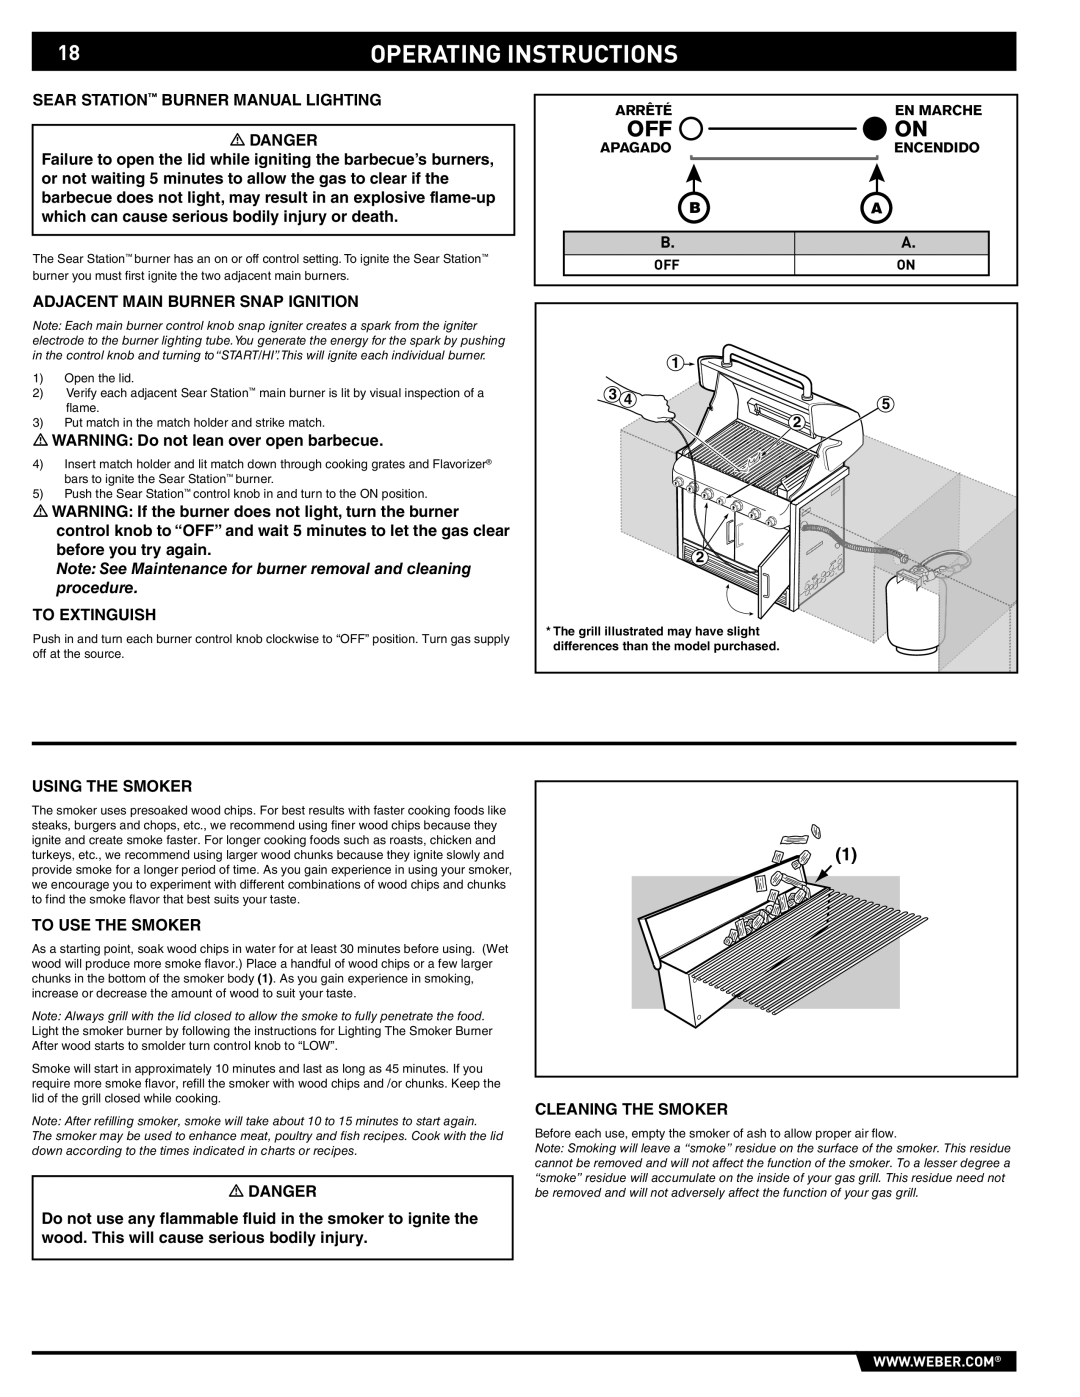 Weber S-460 manual Operating Instructions, Note See Maintenance for burner removal and cleaning procedure 